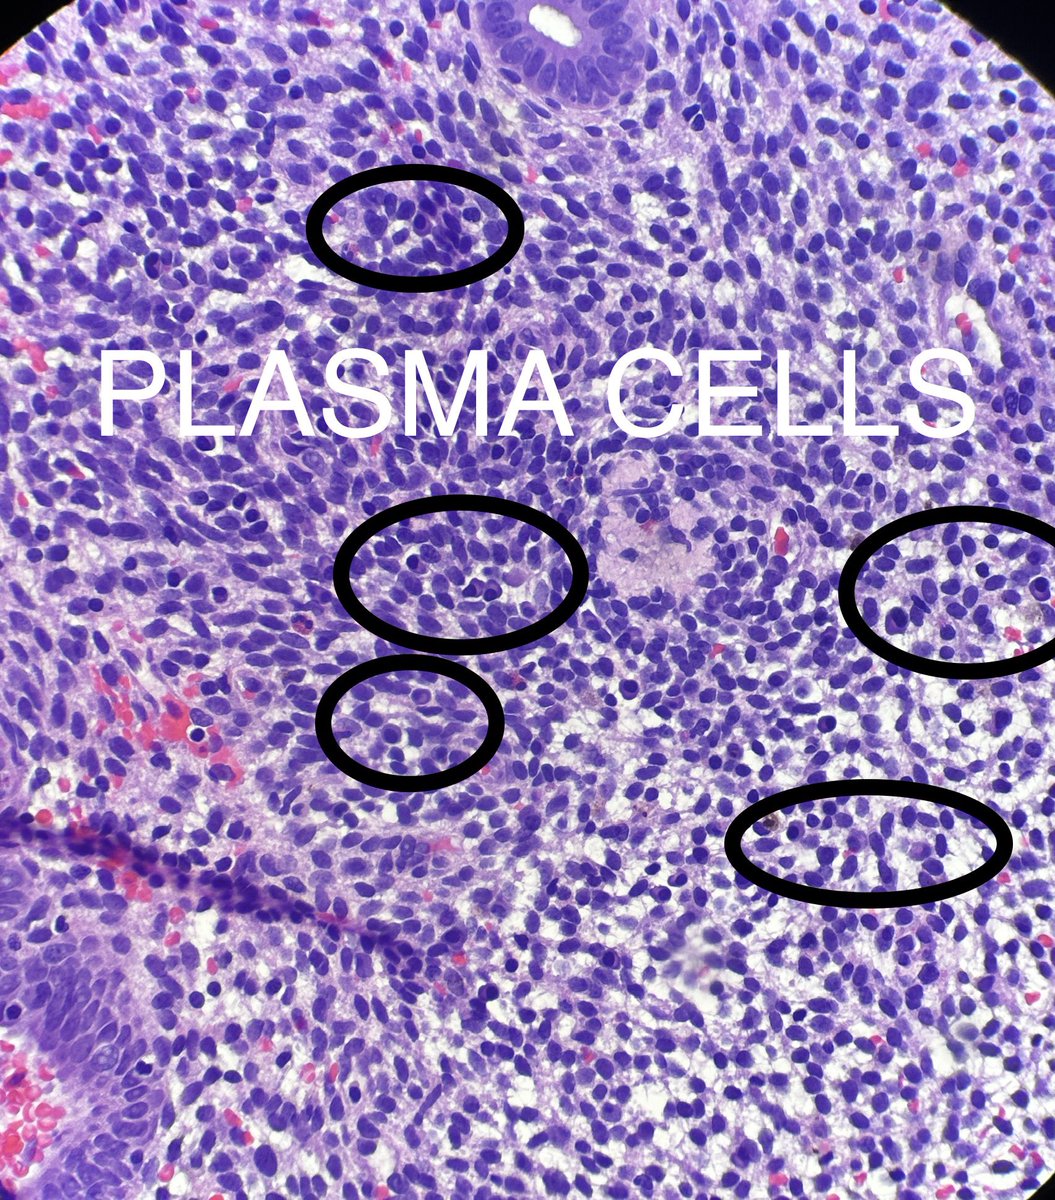 Chronic Endometritis 

Potential cause of pregnancy loss and infertility. 

Unclear etiology but some bacteria might be implicated in it. 

Diagnose: plasma cells in endometrial stroma

Treatment: antibiotics like doxycycline 

#pathtwitter #gyntwitter #obtwitter #gyntwitter